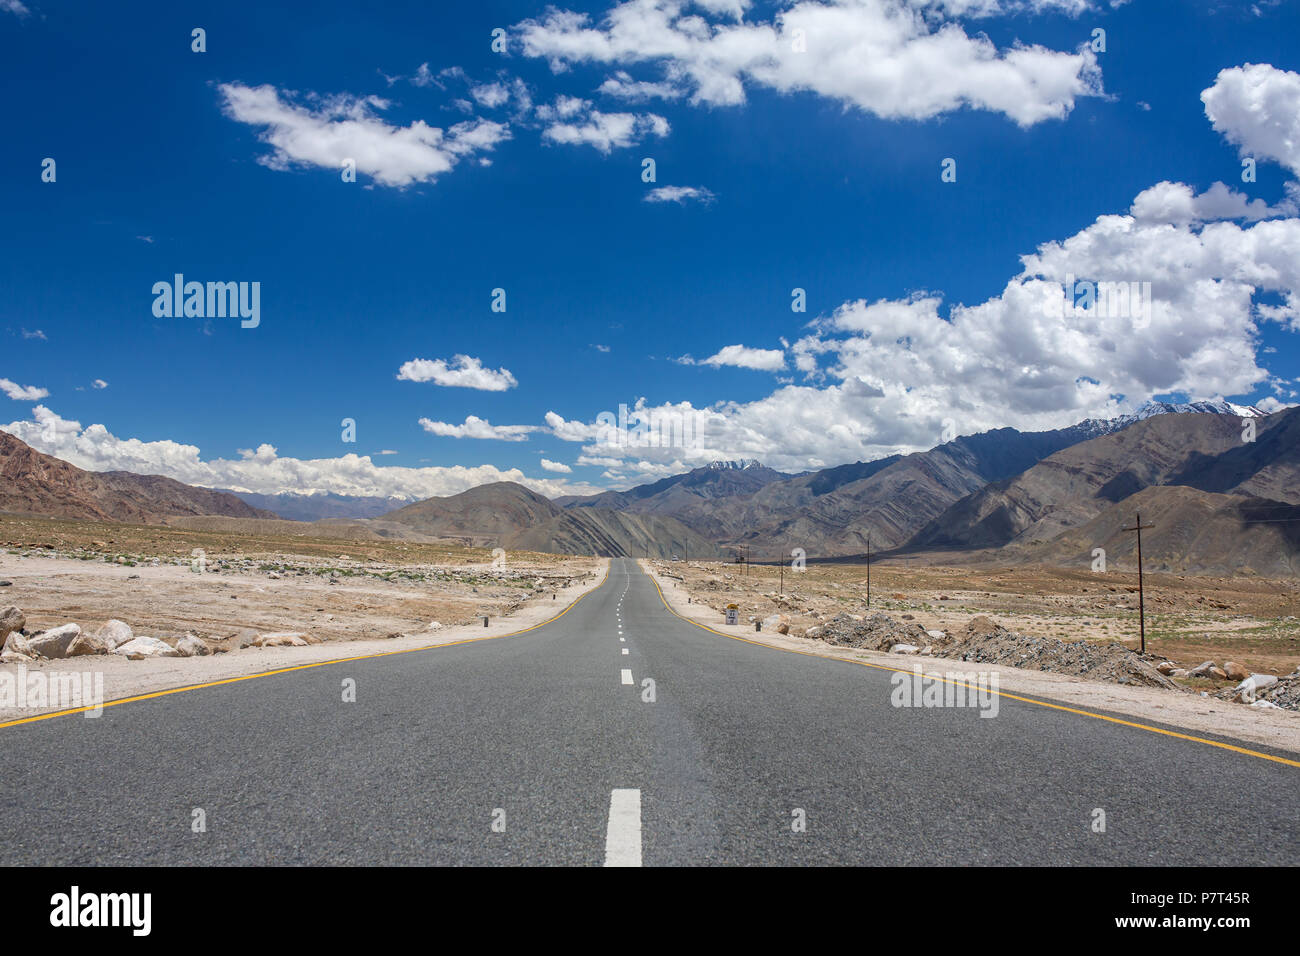 Emty road vanishing into HImalayas mountains in Ladakh, Northern India. Road trip concept Stock Photo